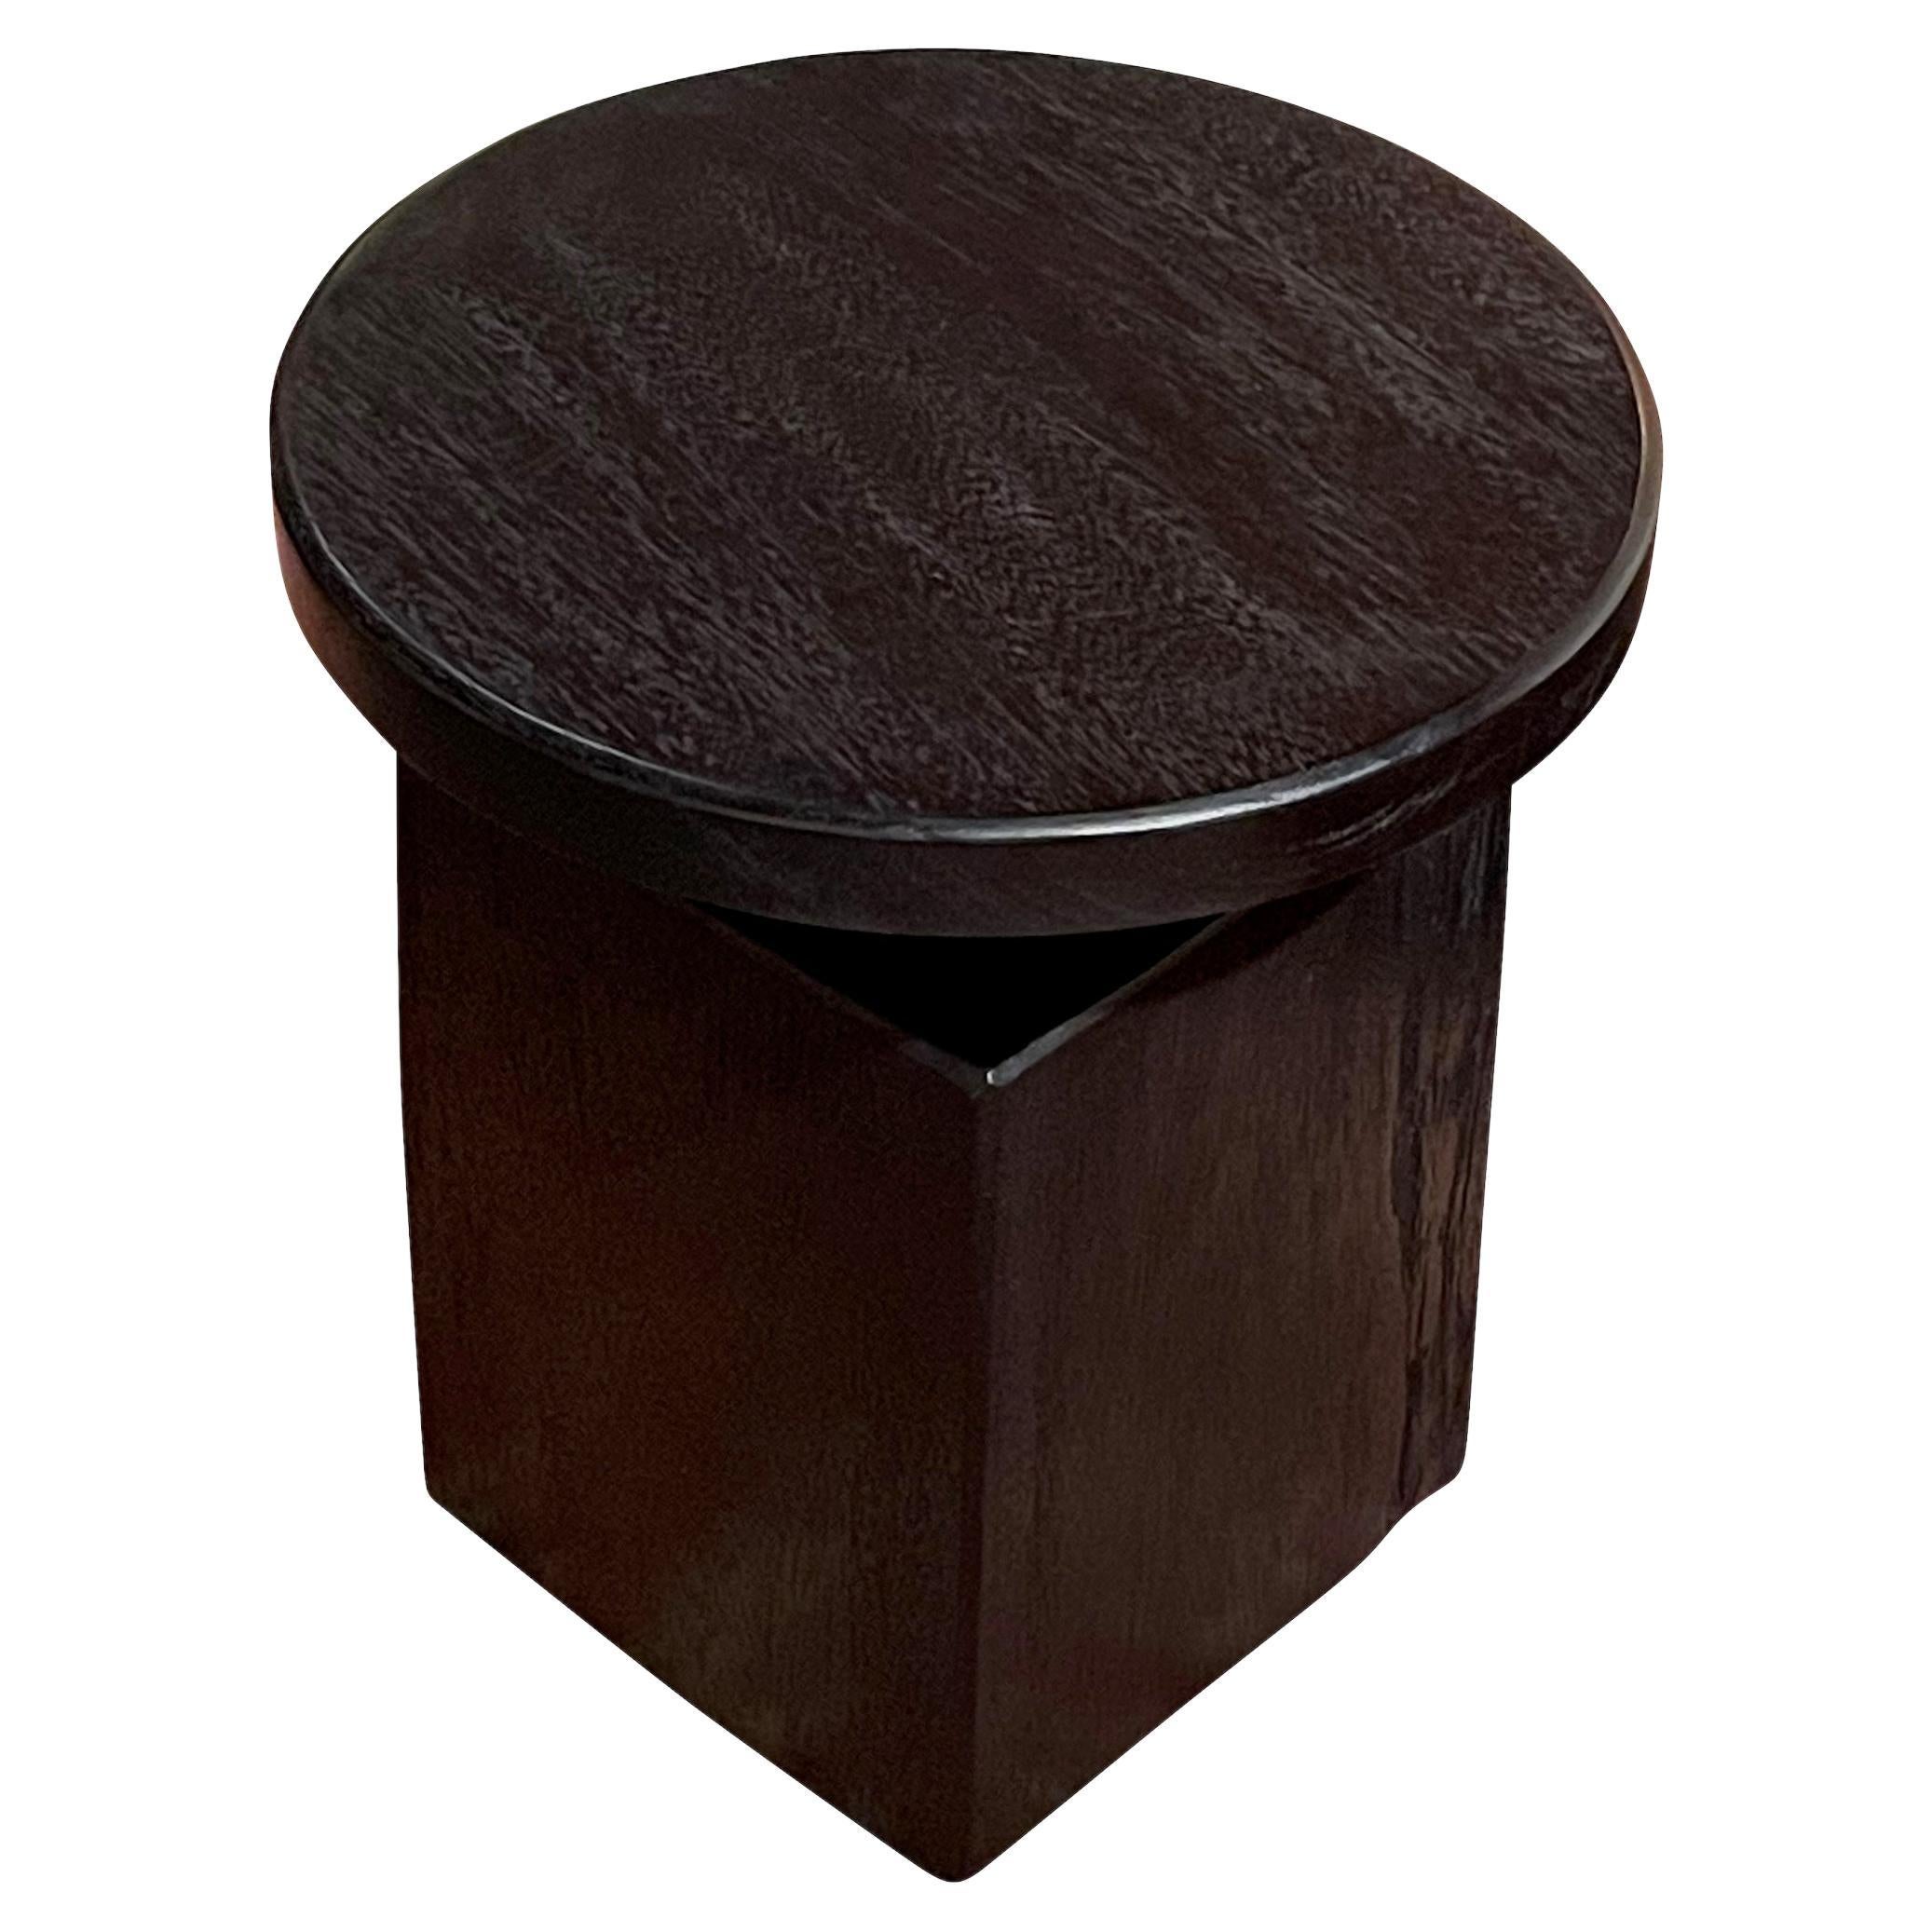 Contemporary Indonesian round over square shaped side table.
Ebonized lychee wood.
Two available and sold individually.